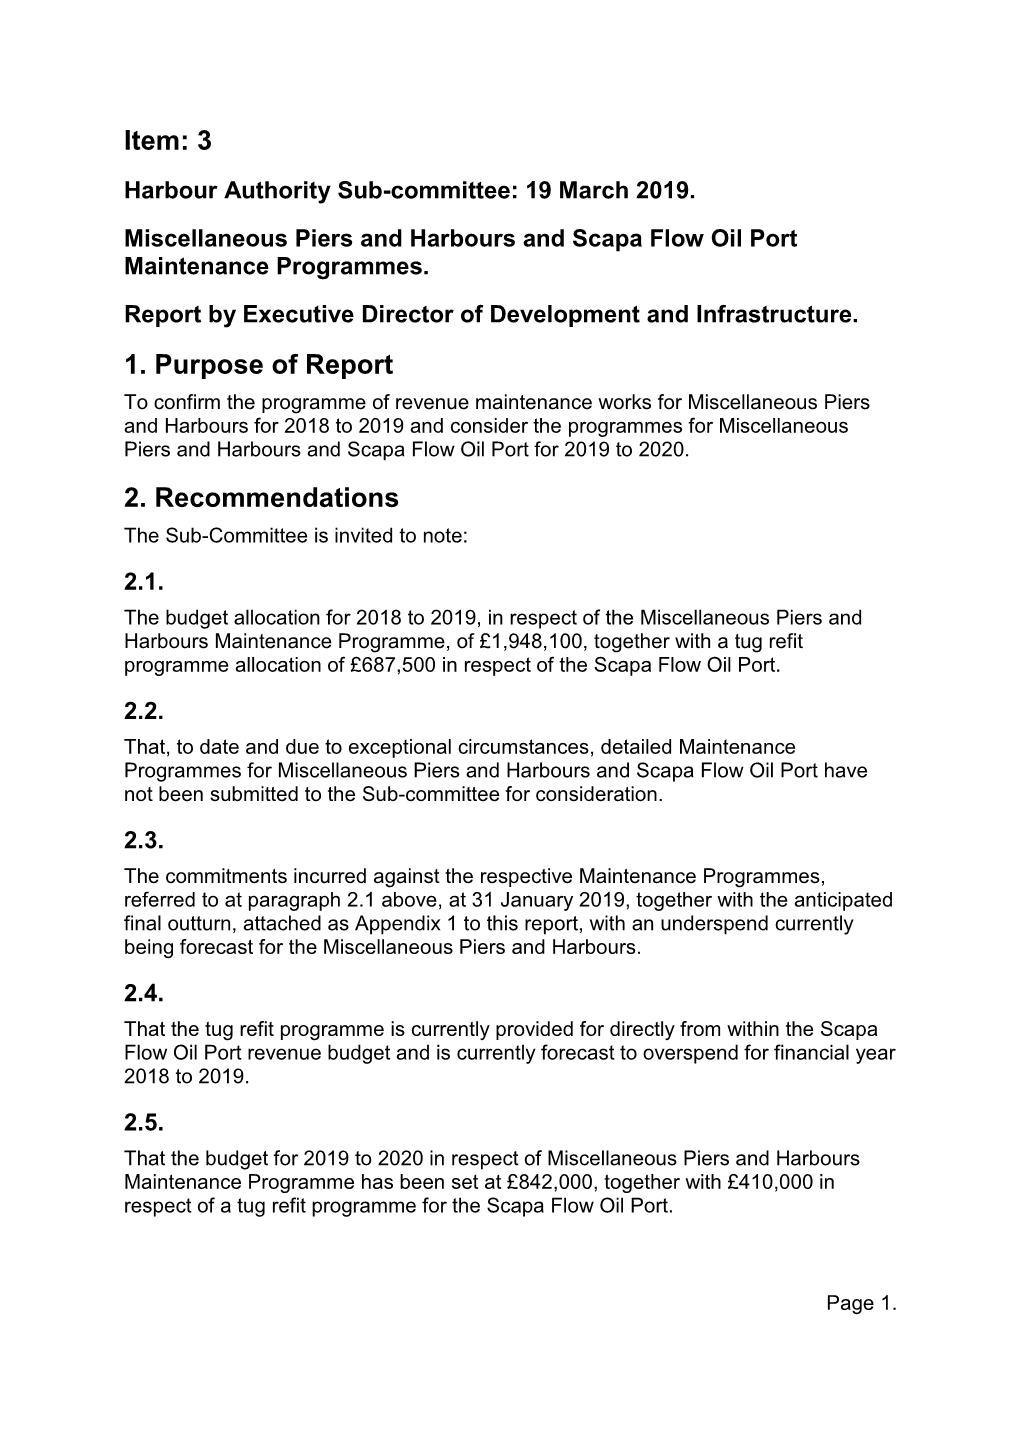 Miscellaneous Piers and Harbours and Scapa Flow Oil Port Maintenance Programmes